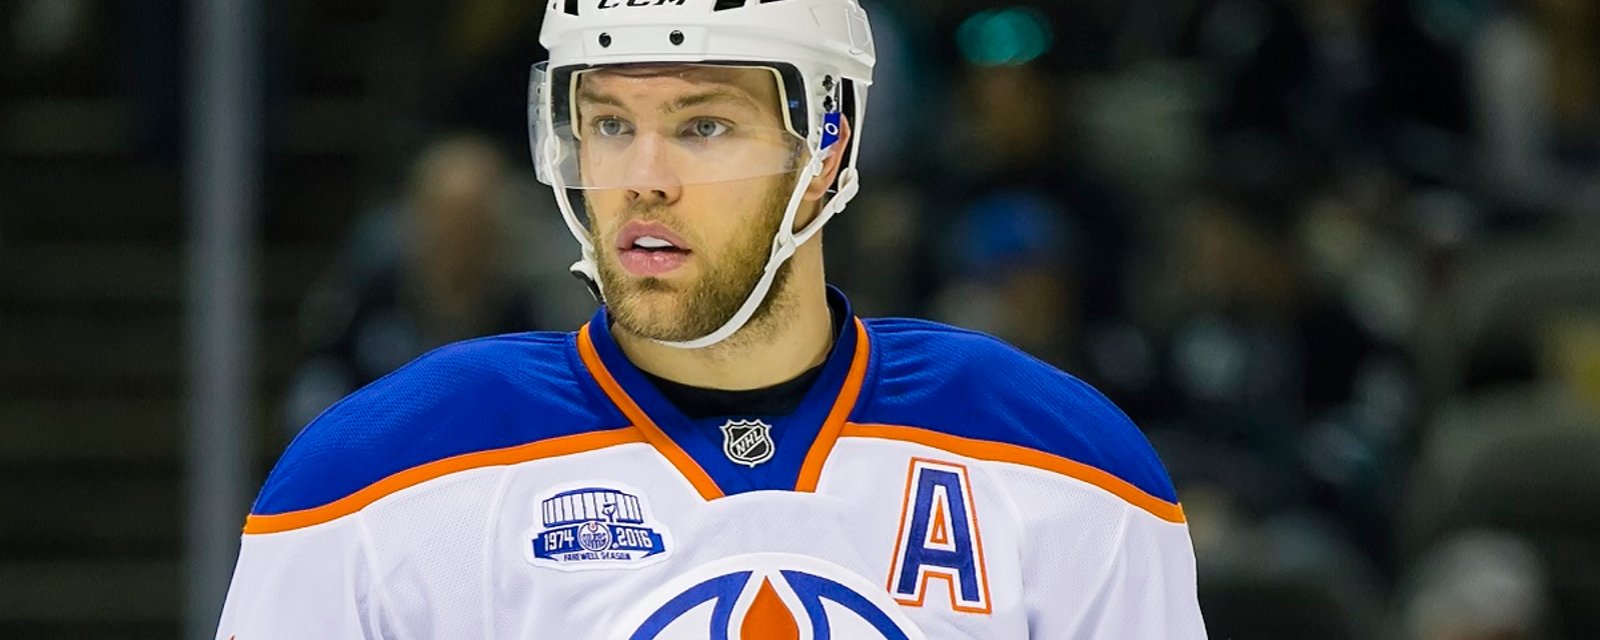 Taylor Hall makes some shocking comments about the Oilers.